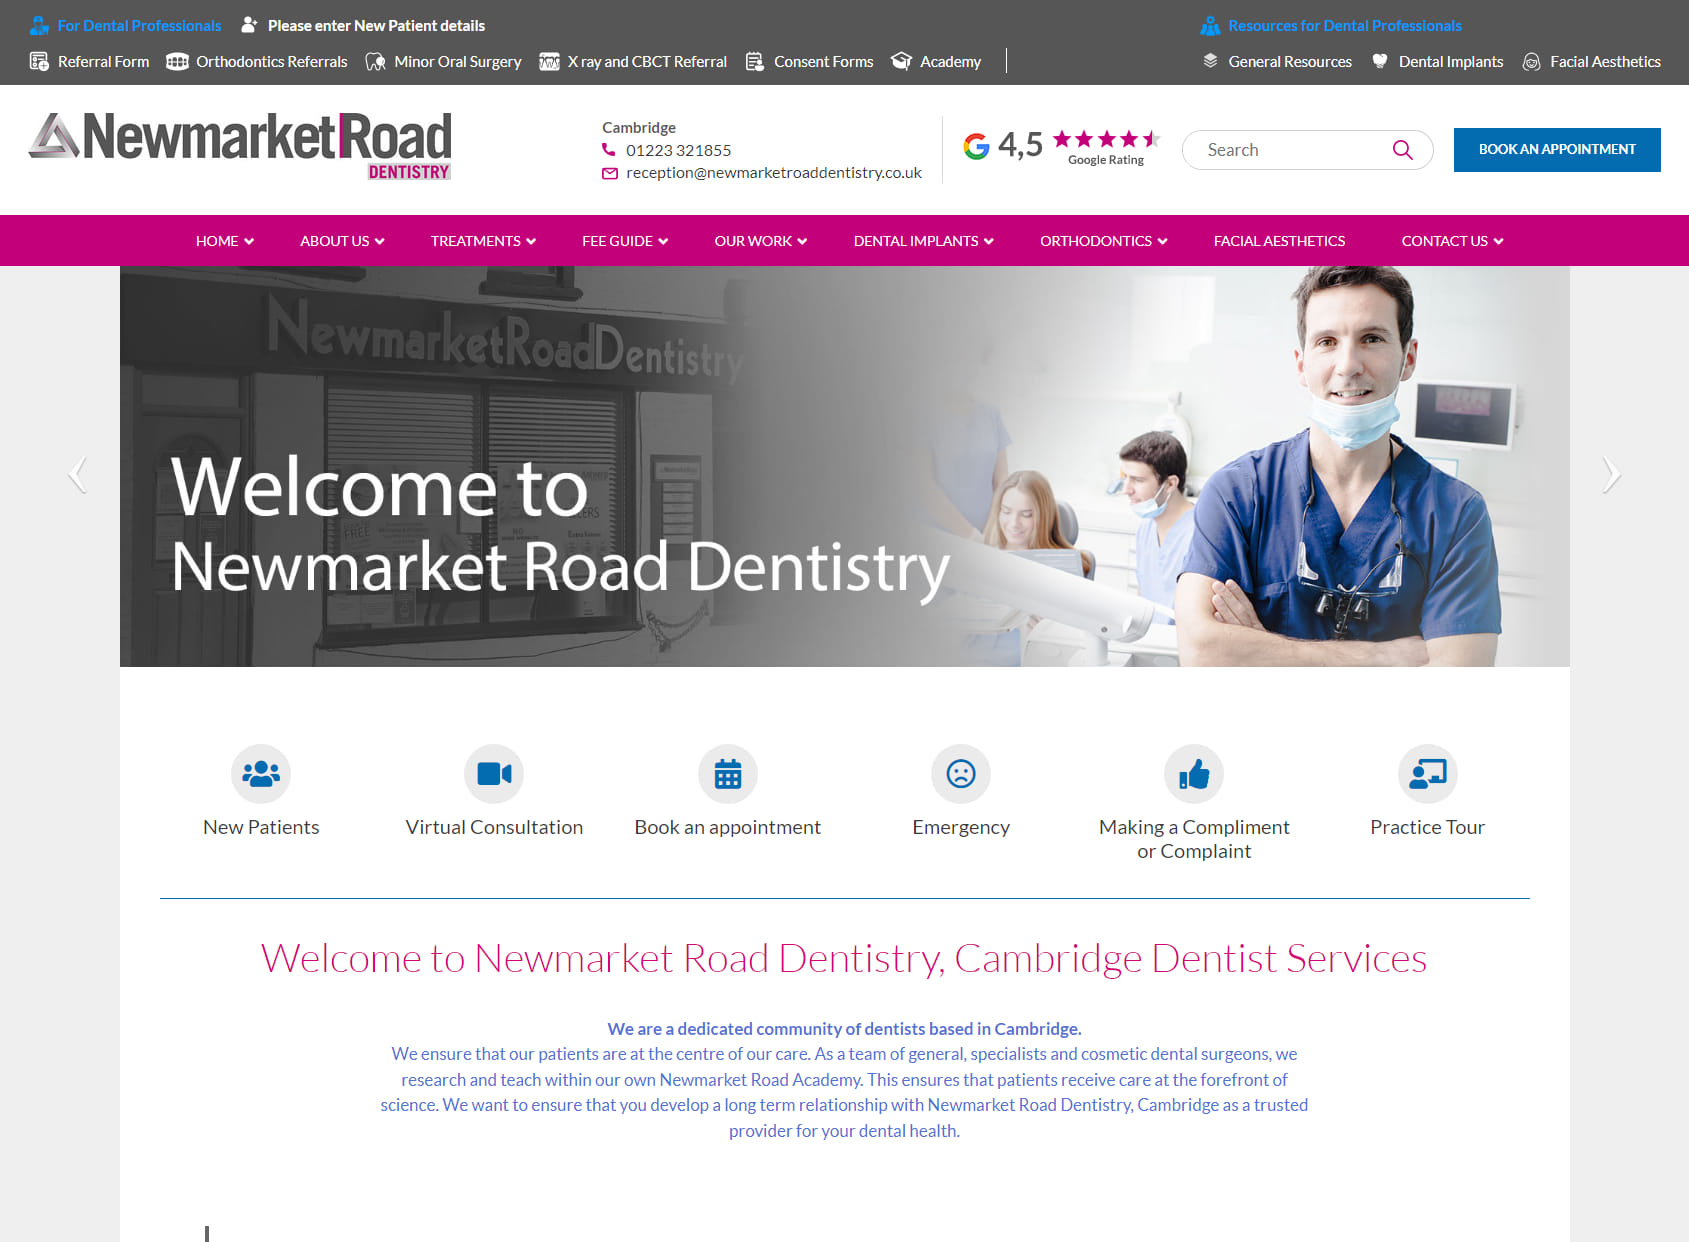 Newmarket Road Dentistry